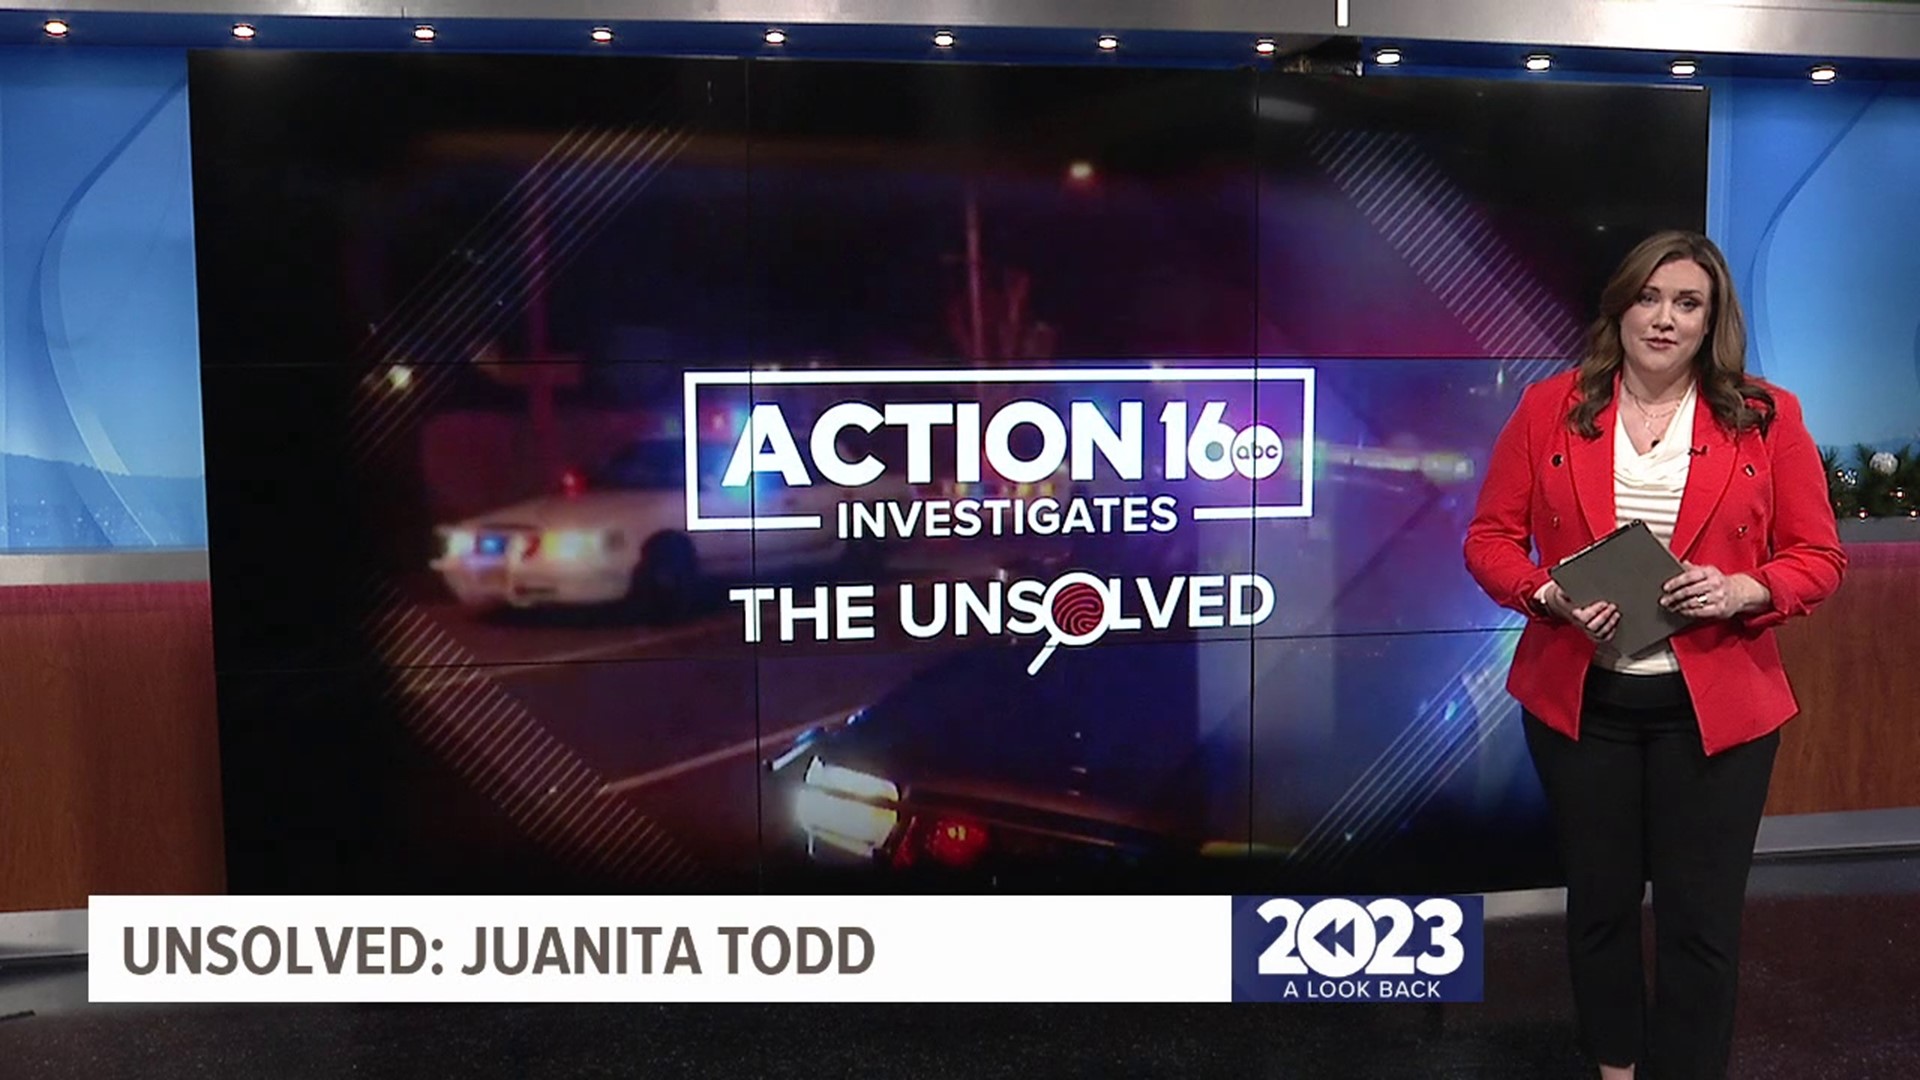 Take a look back at some of the biggest Action 16 Investigations of 2023.